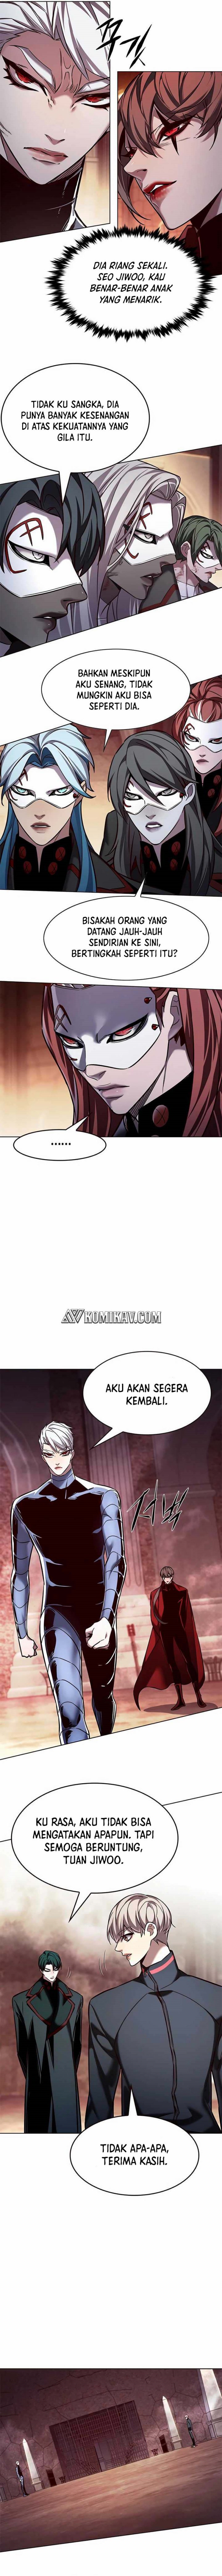 Eleceed Chapter 251